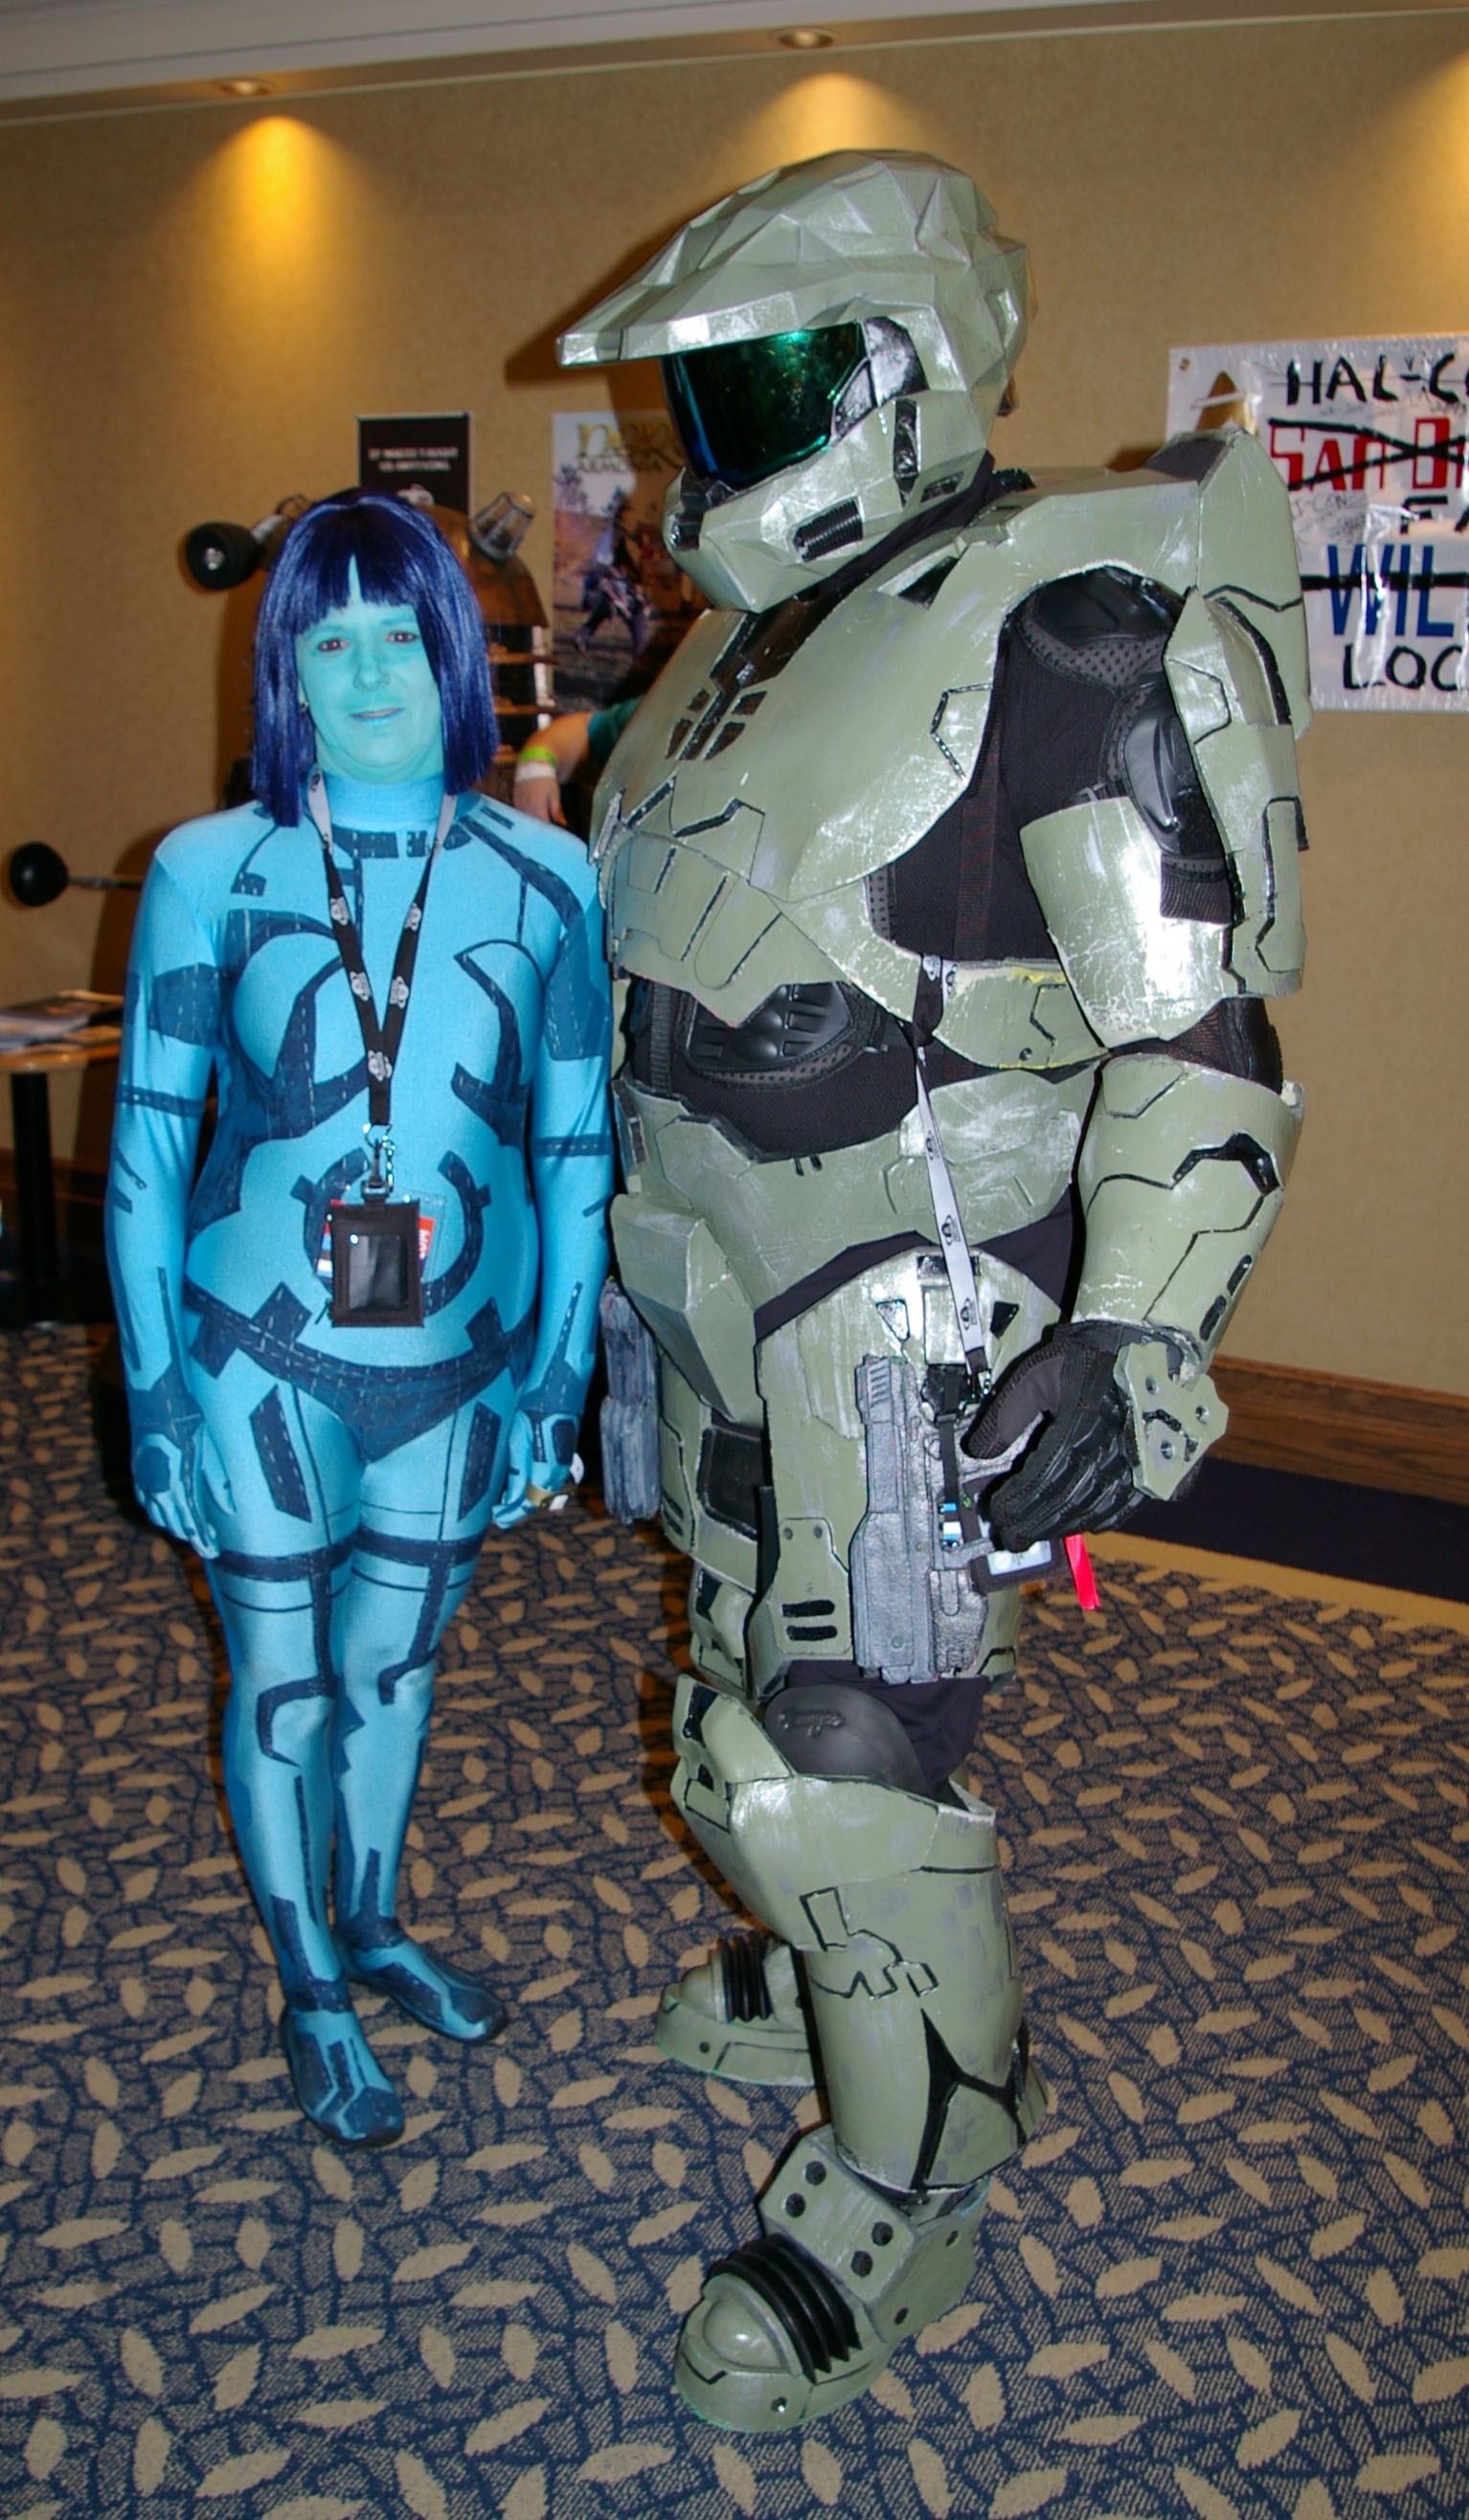 A day at Hal-Con